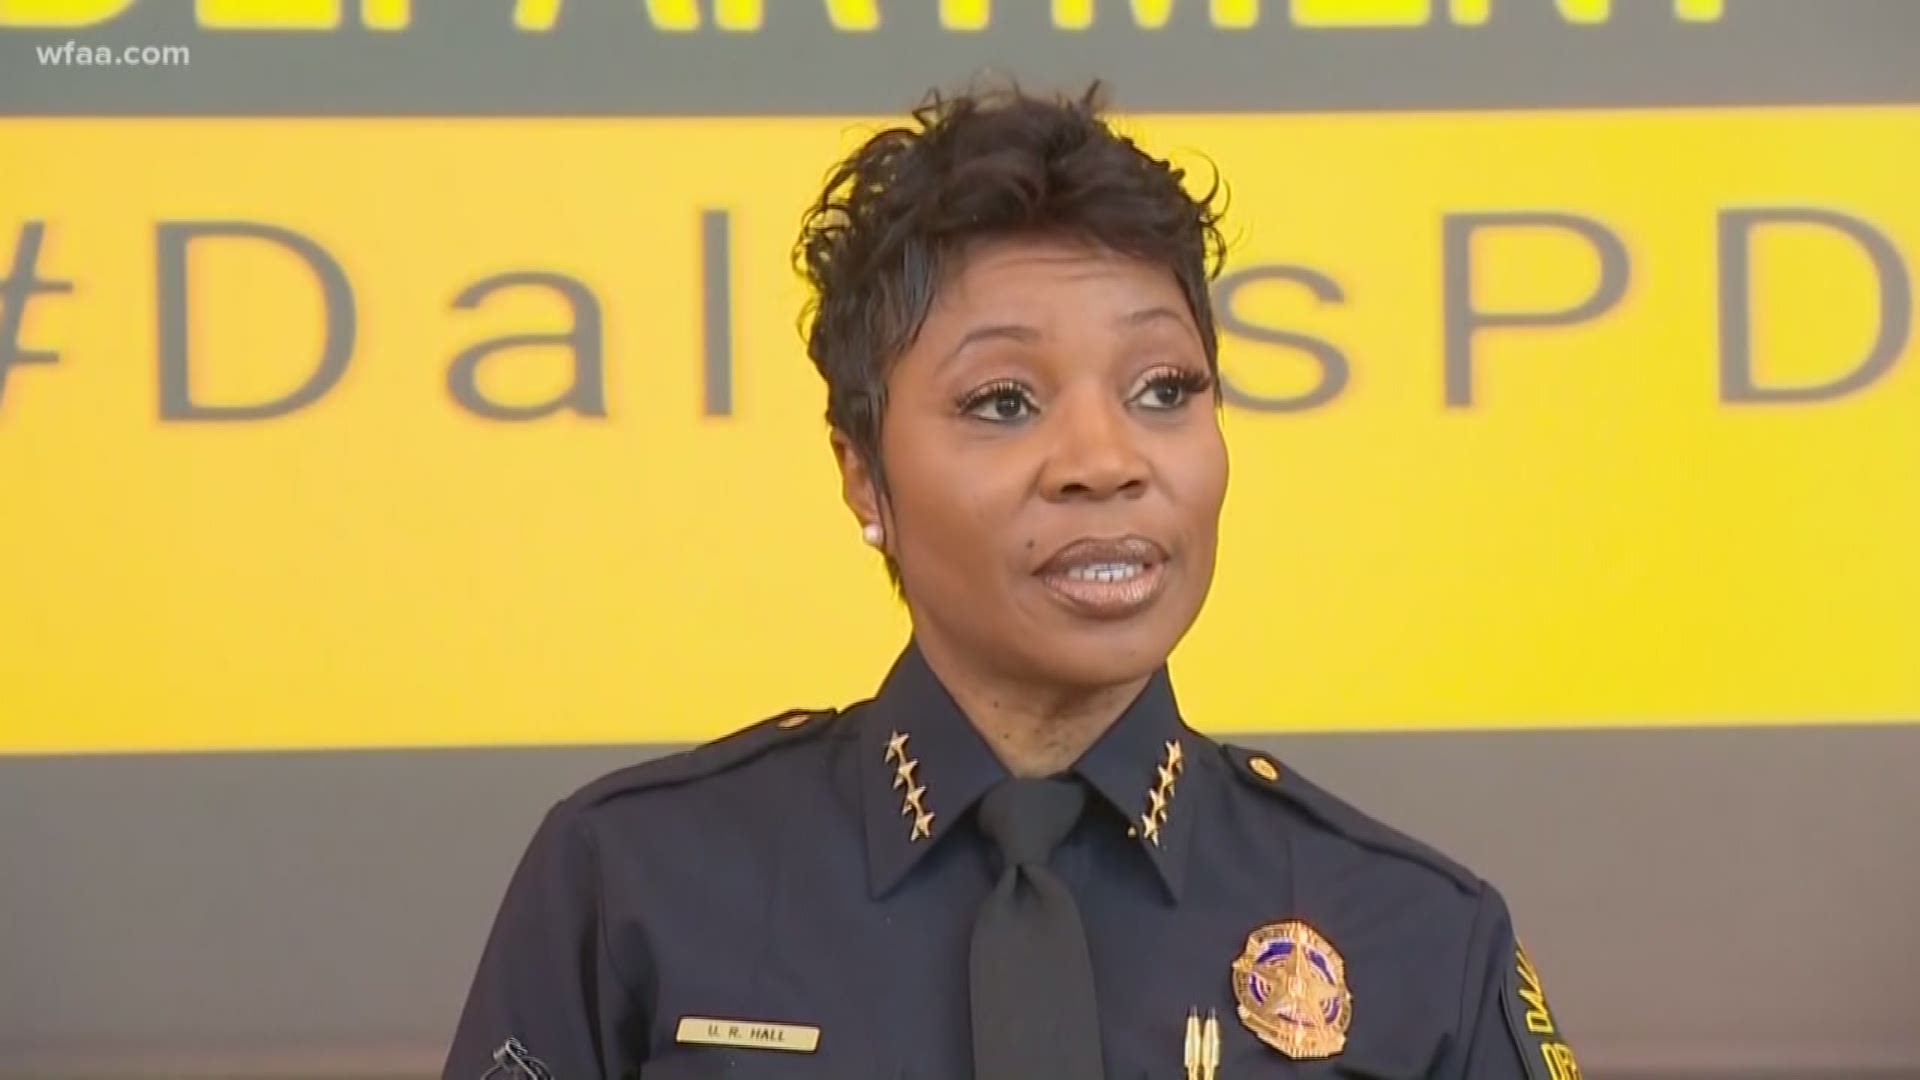 Dallas police Chief Renee Hall has been on medical leave for a month and the city manager says he has no timeline for her return. Many citizens and police officers wondering what is going on.